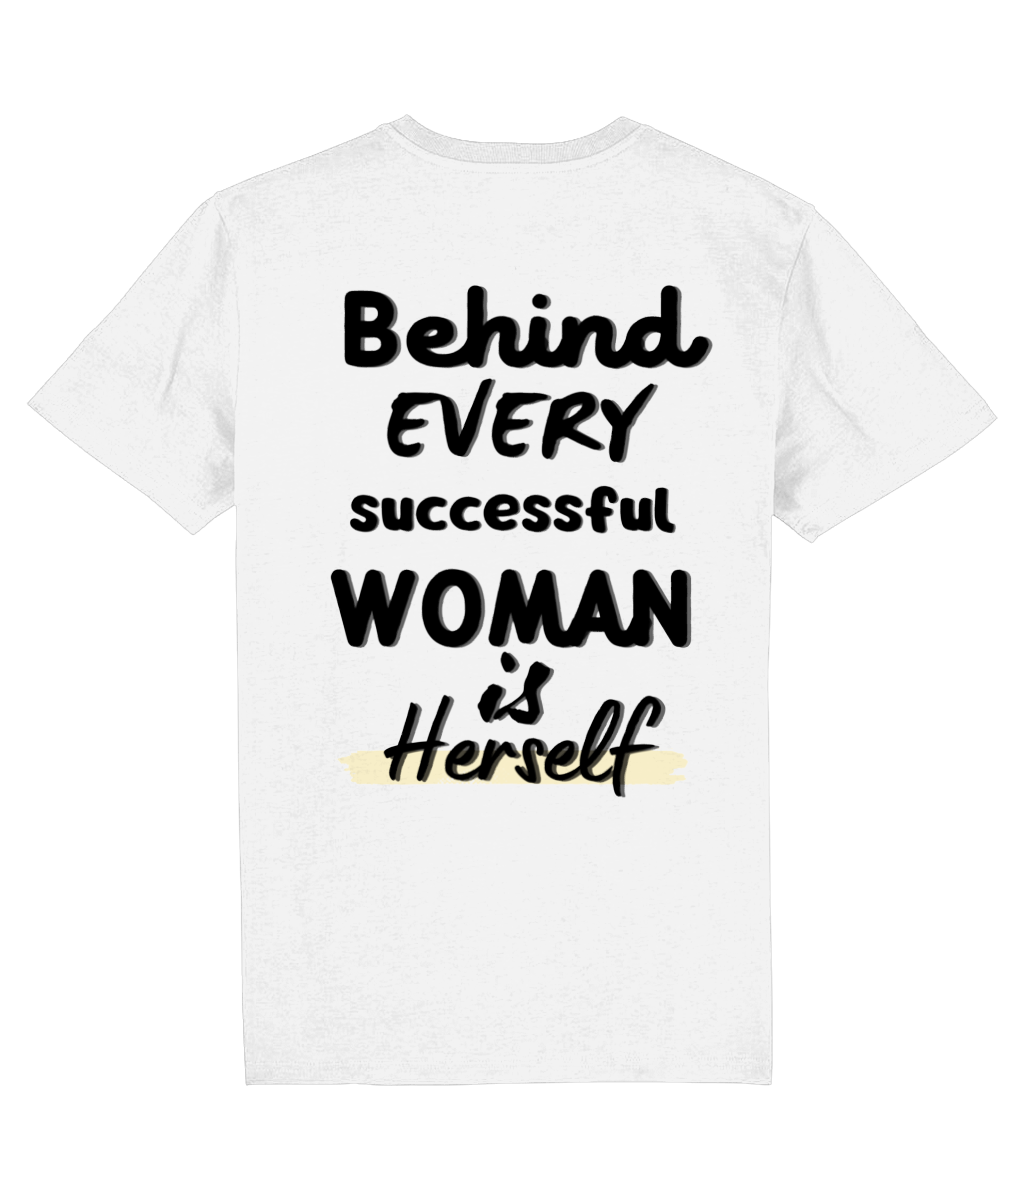 Every Successful Woman T-Shirt